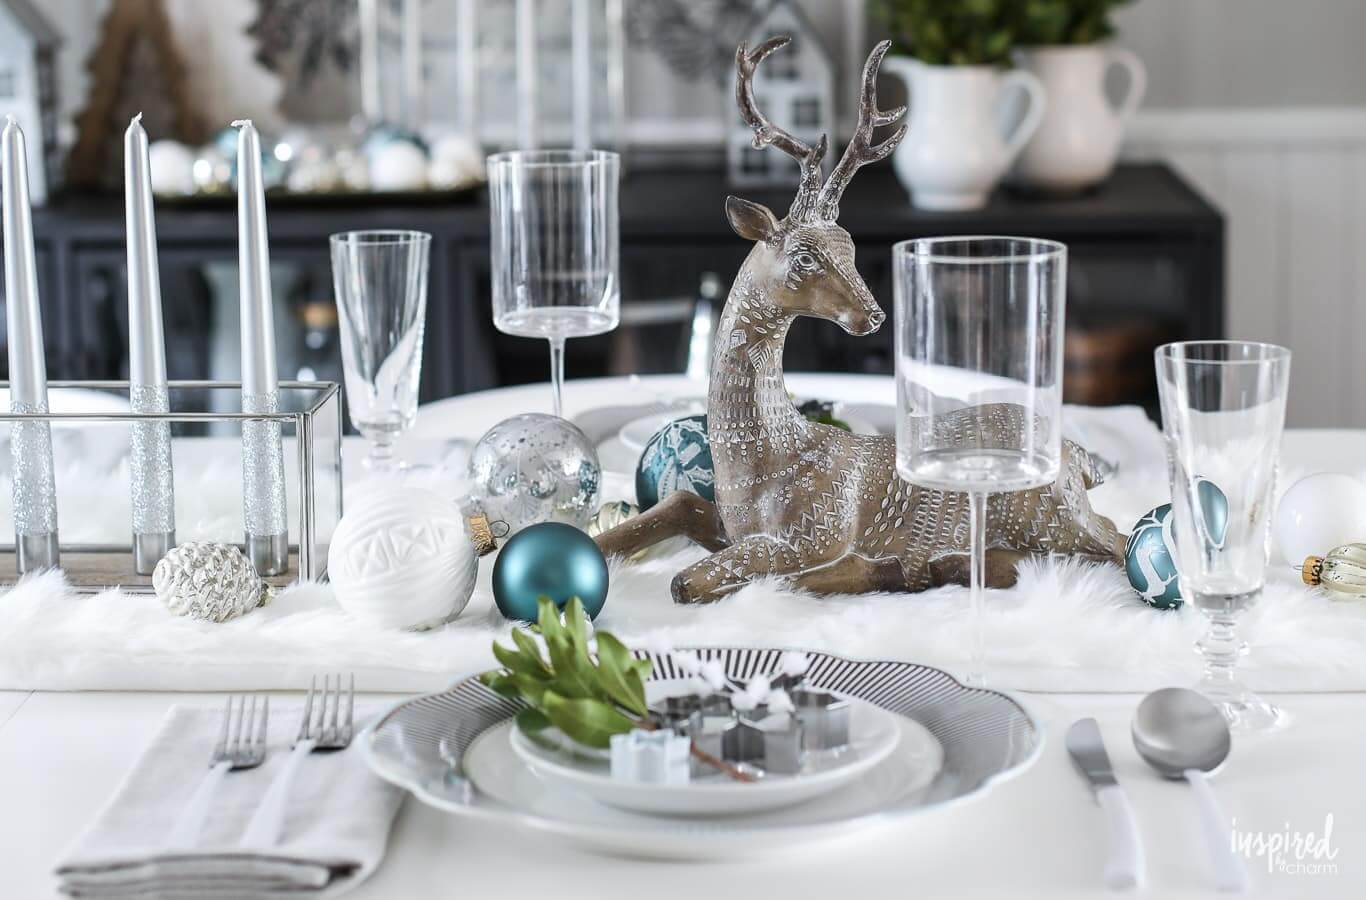 100 Best Christmas Table Decoration Tips and Ideas with Images